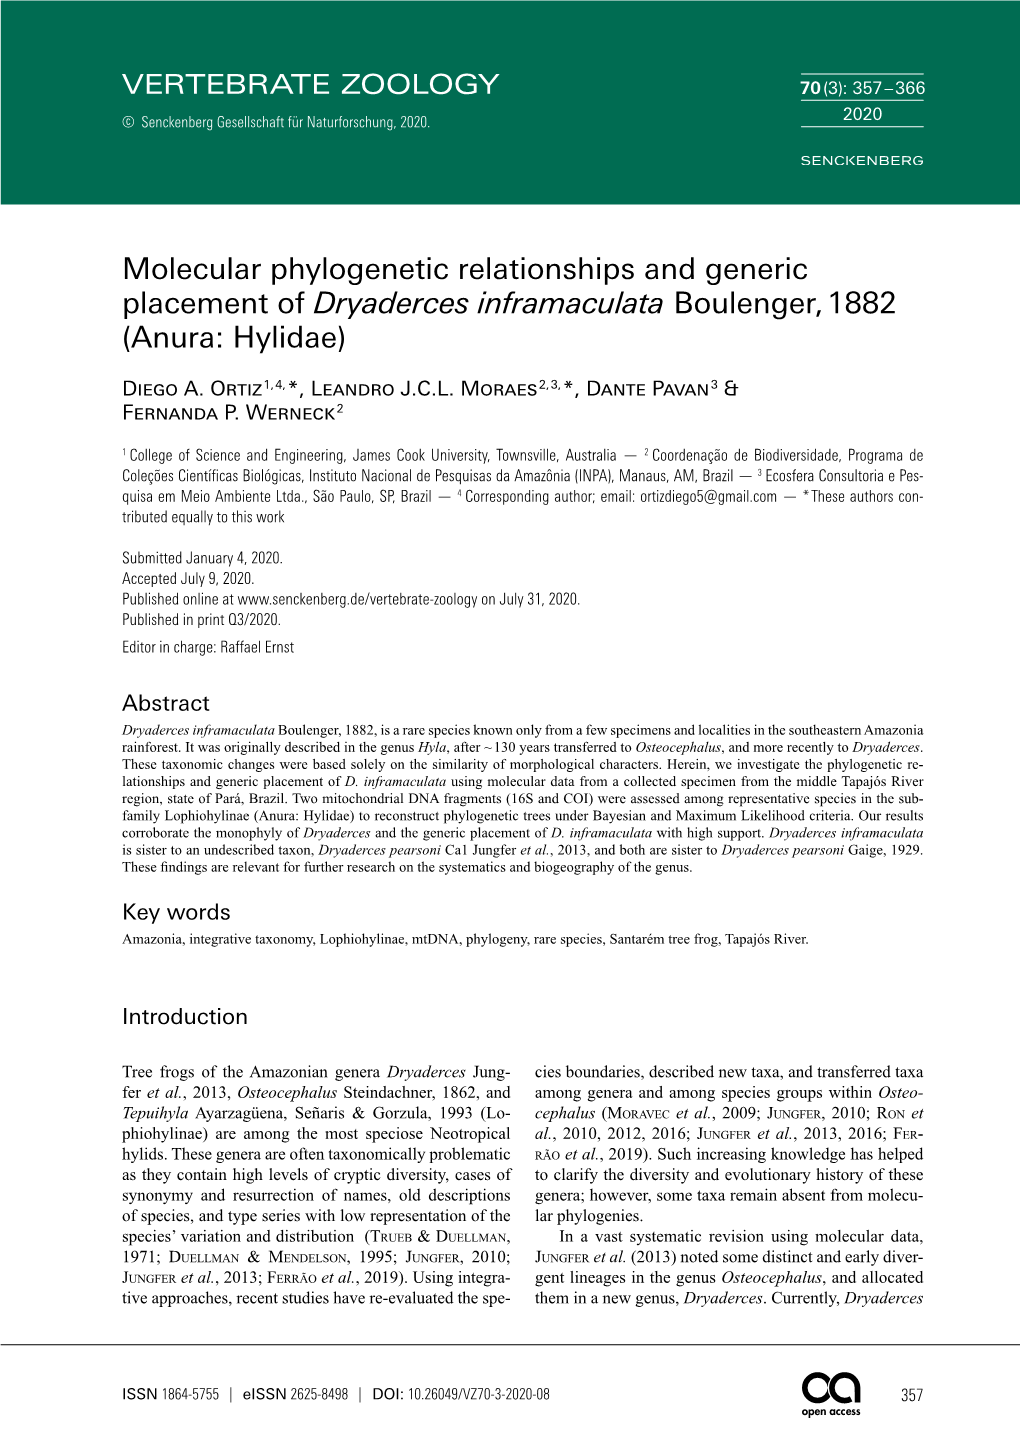 Molecular Phylogenetic Relationships and Generic Placement of Dryaderces Inframaculata Boulenger, 1882 (Anura: Hylidae)